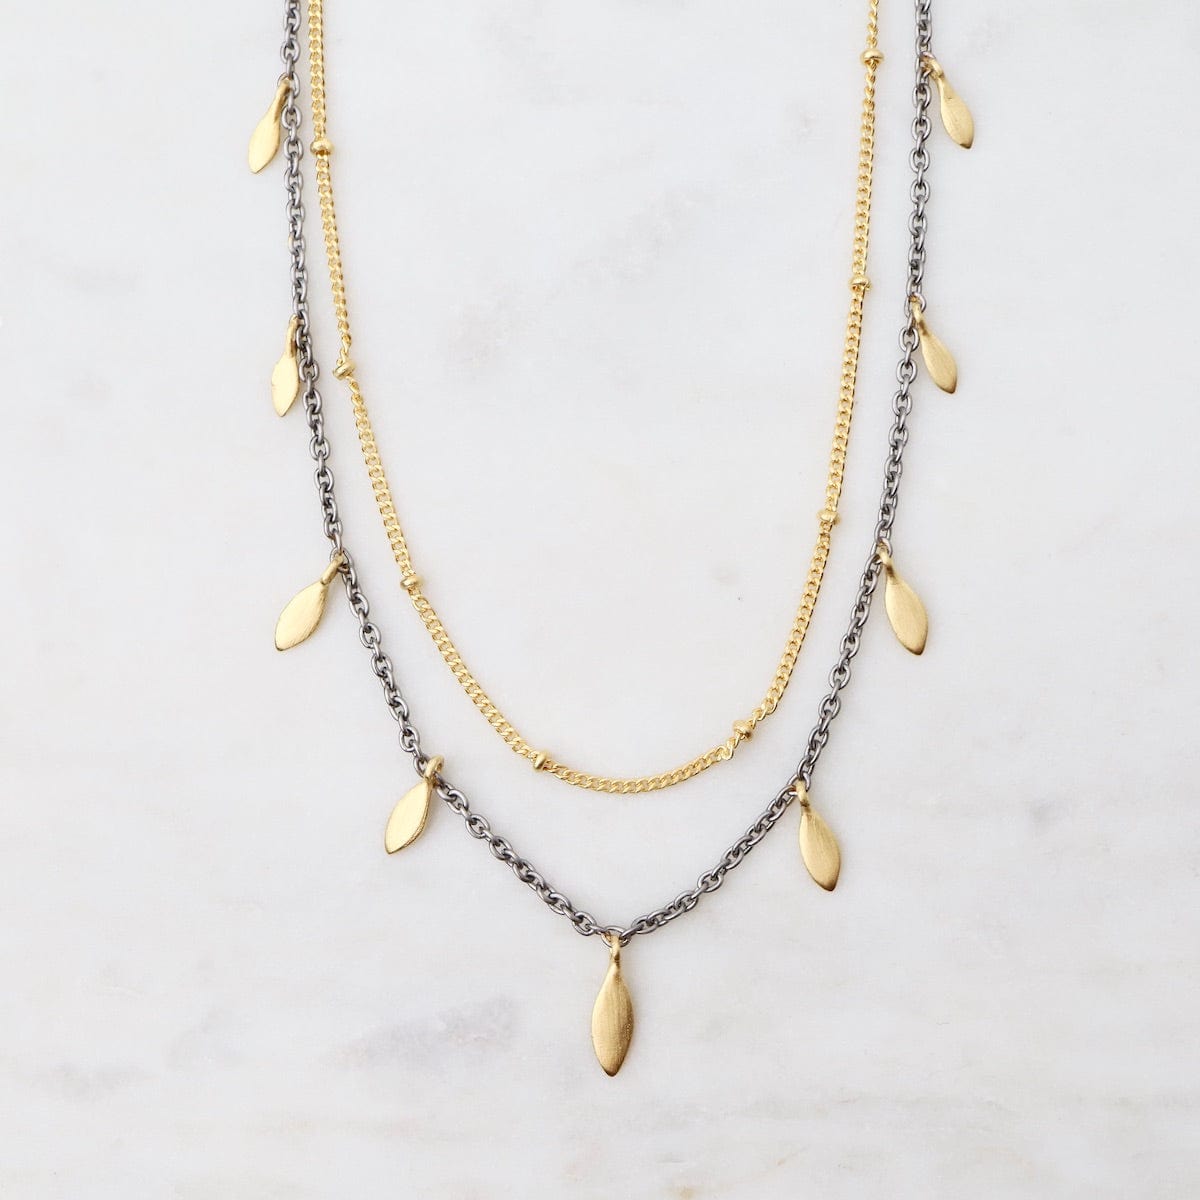 NKL-GPL Two Tone Two Layer Necklace with Leaves